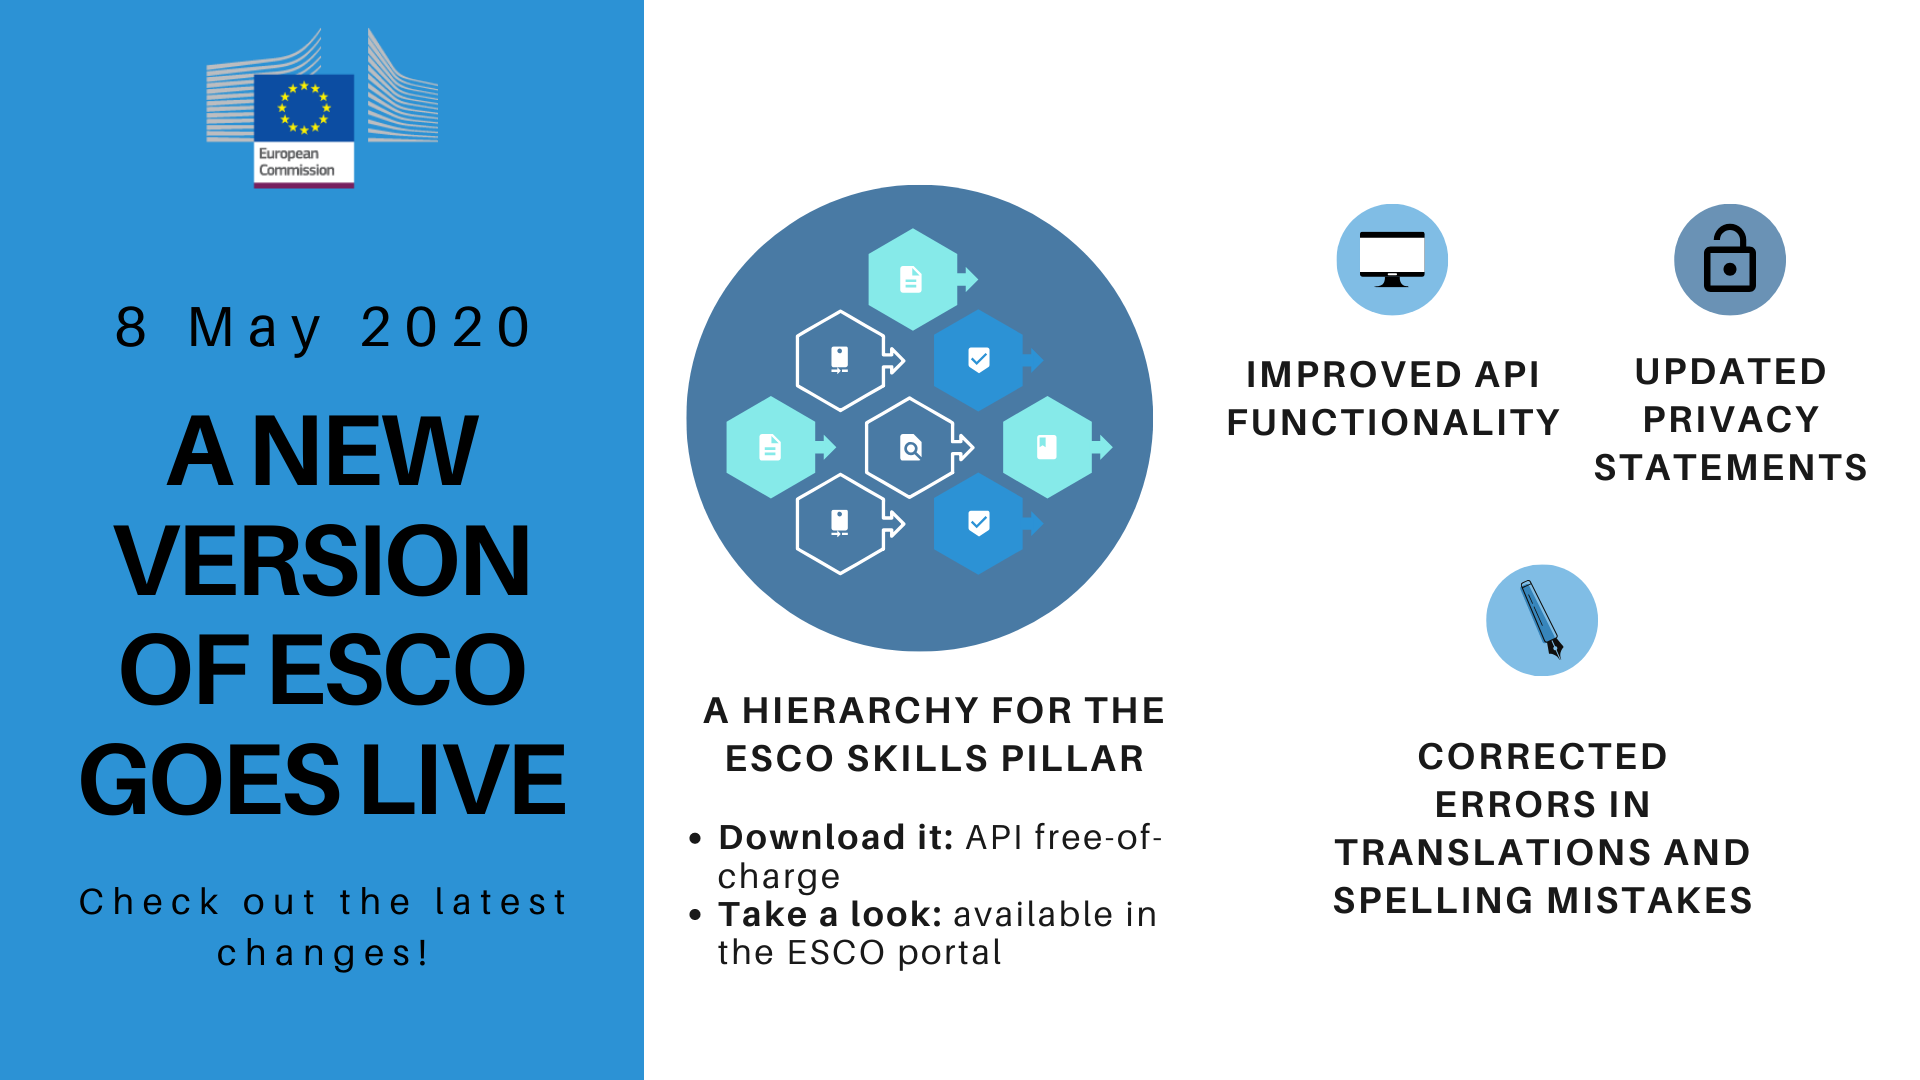 A new minor version of ESCO goes live summarizing the changes underlined in the article 